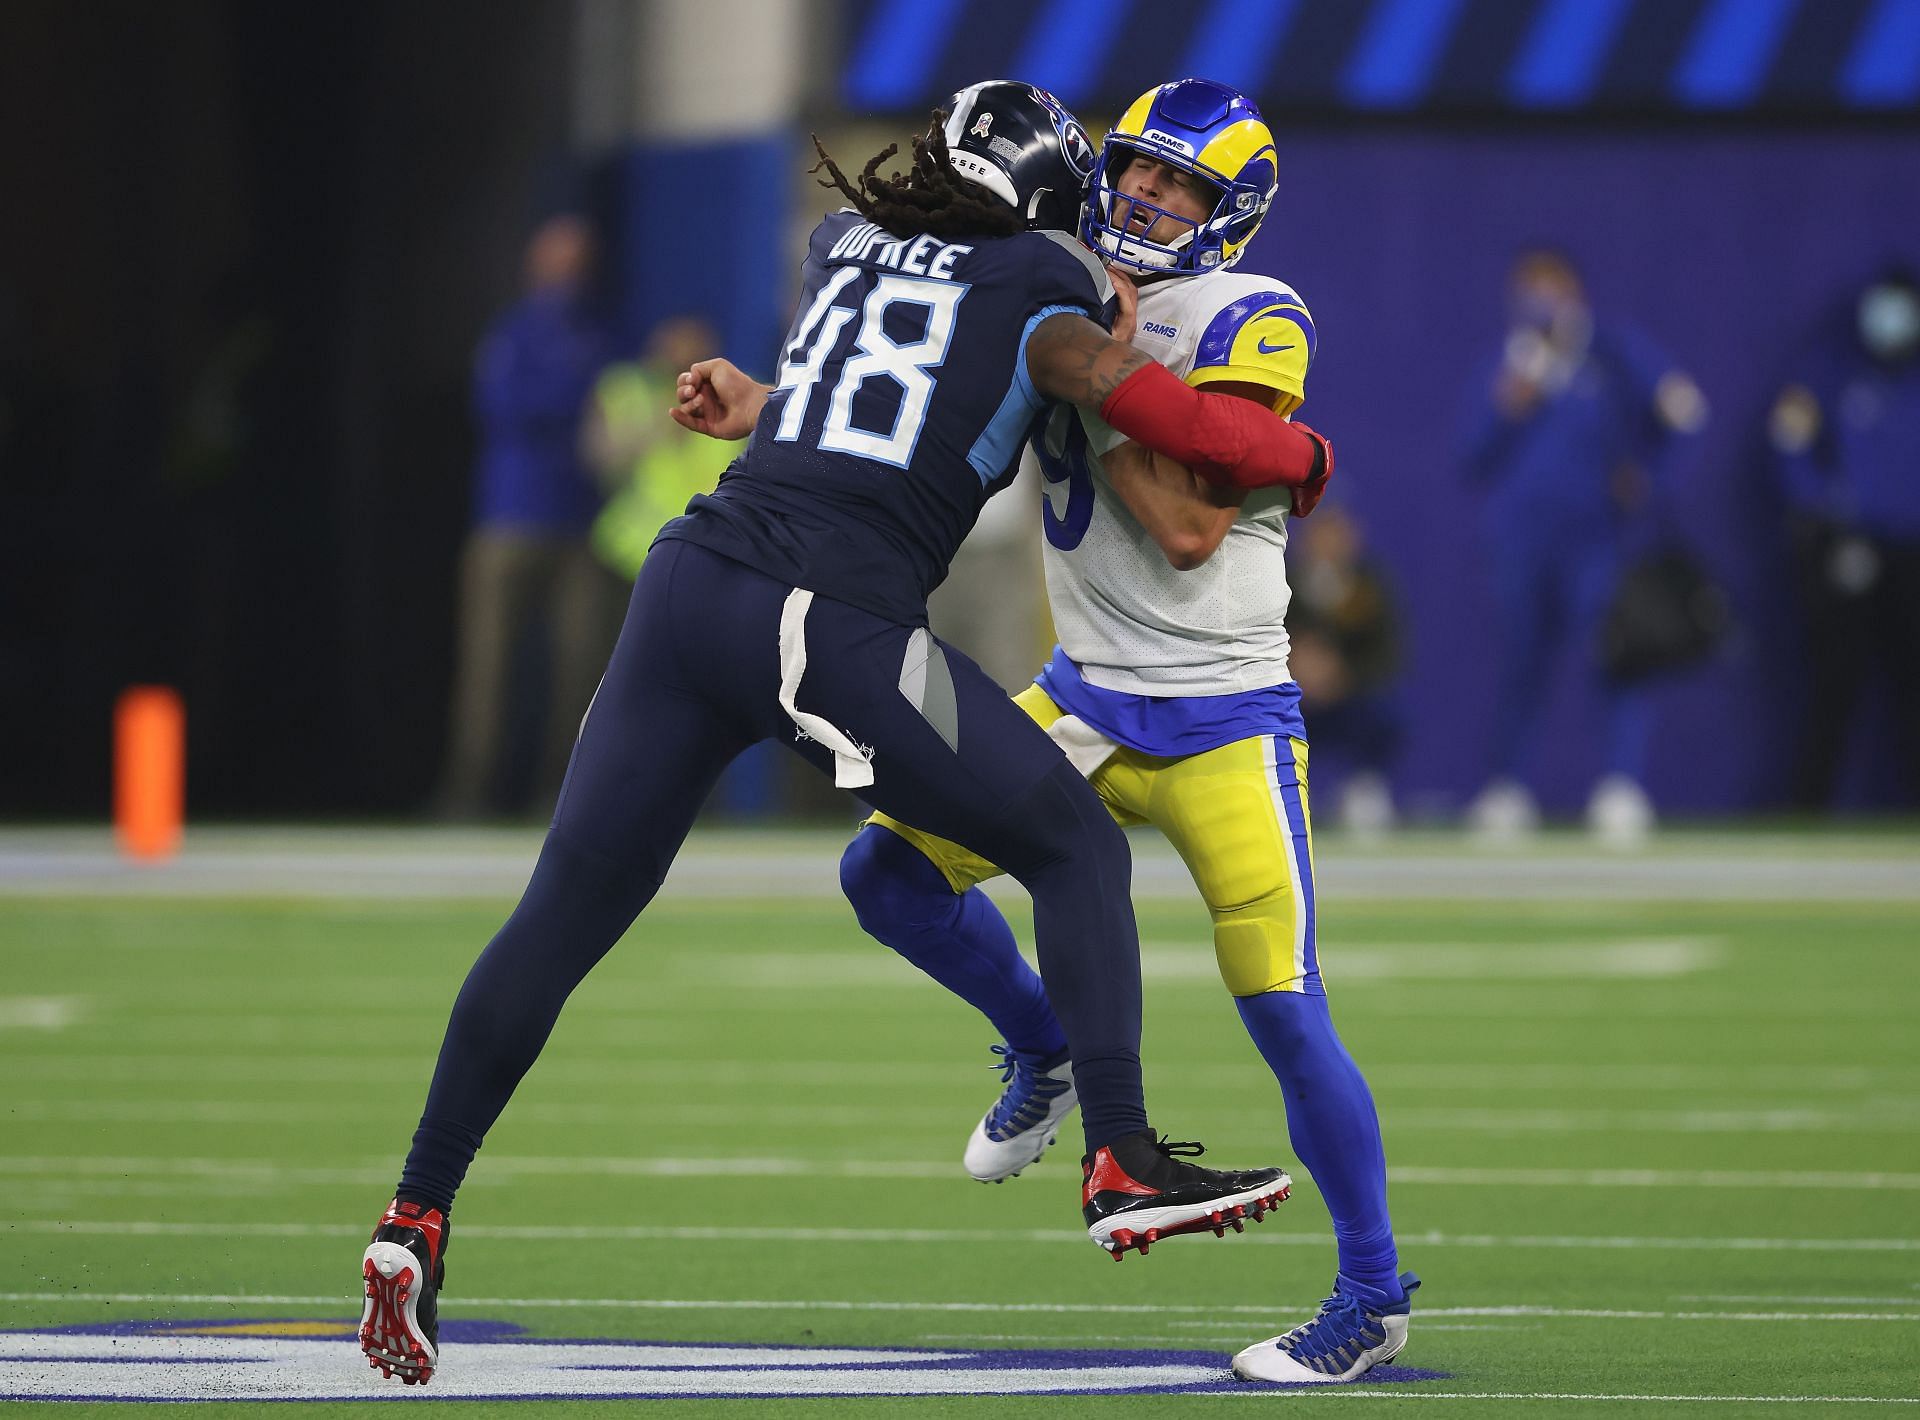 Matthew Stafford #9 of the Los Angeles Rams reacts as he is pressured by Bud Dupree #48 of the Tennessee Titans